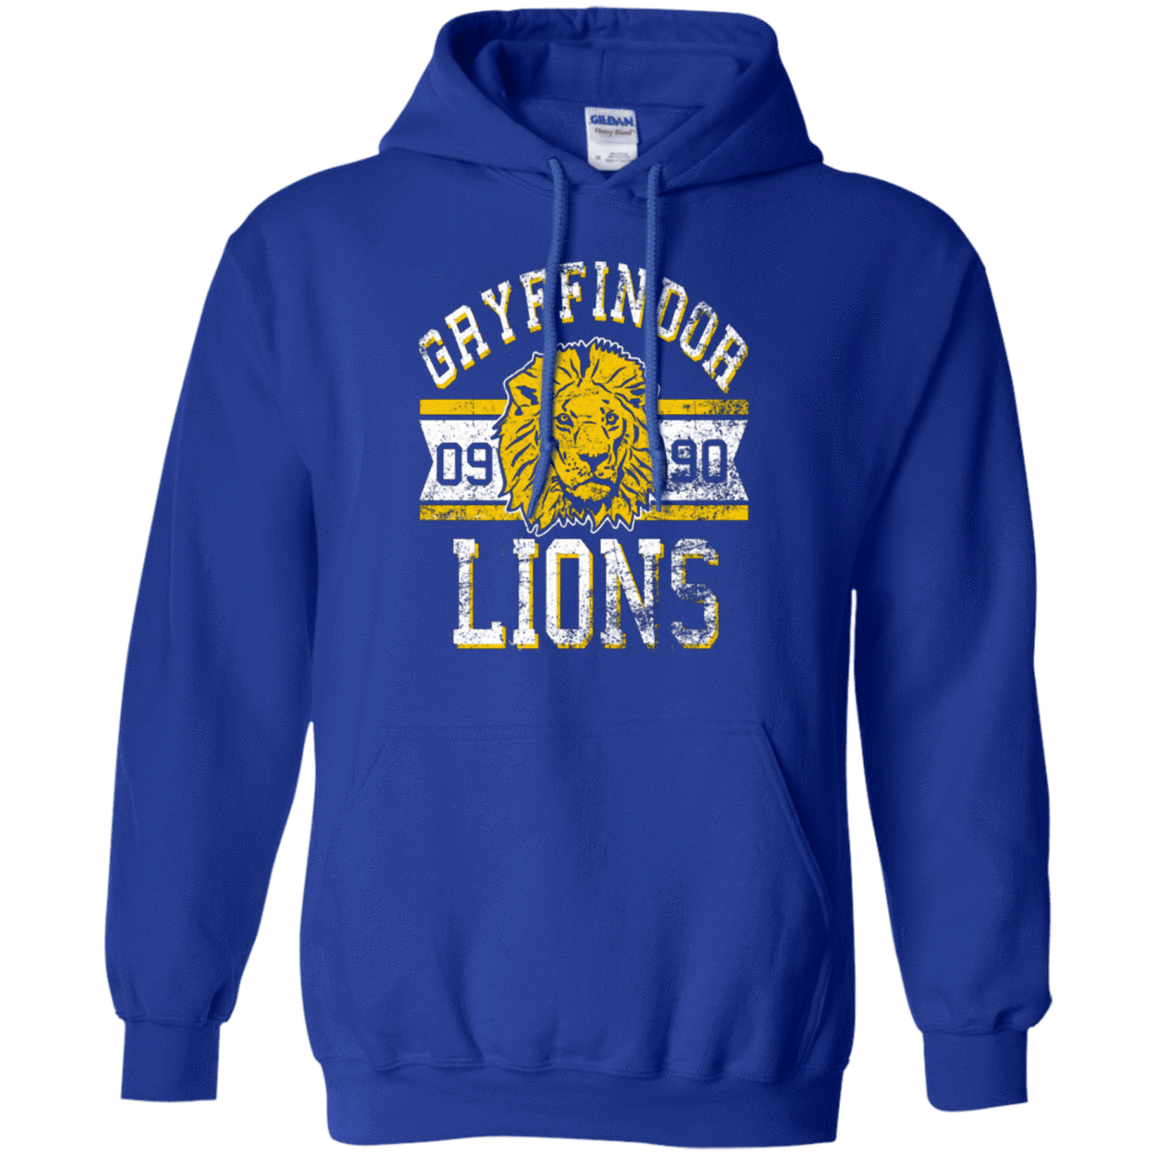 Sweatshirts Royal / Small Lions Pullover Hoodie